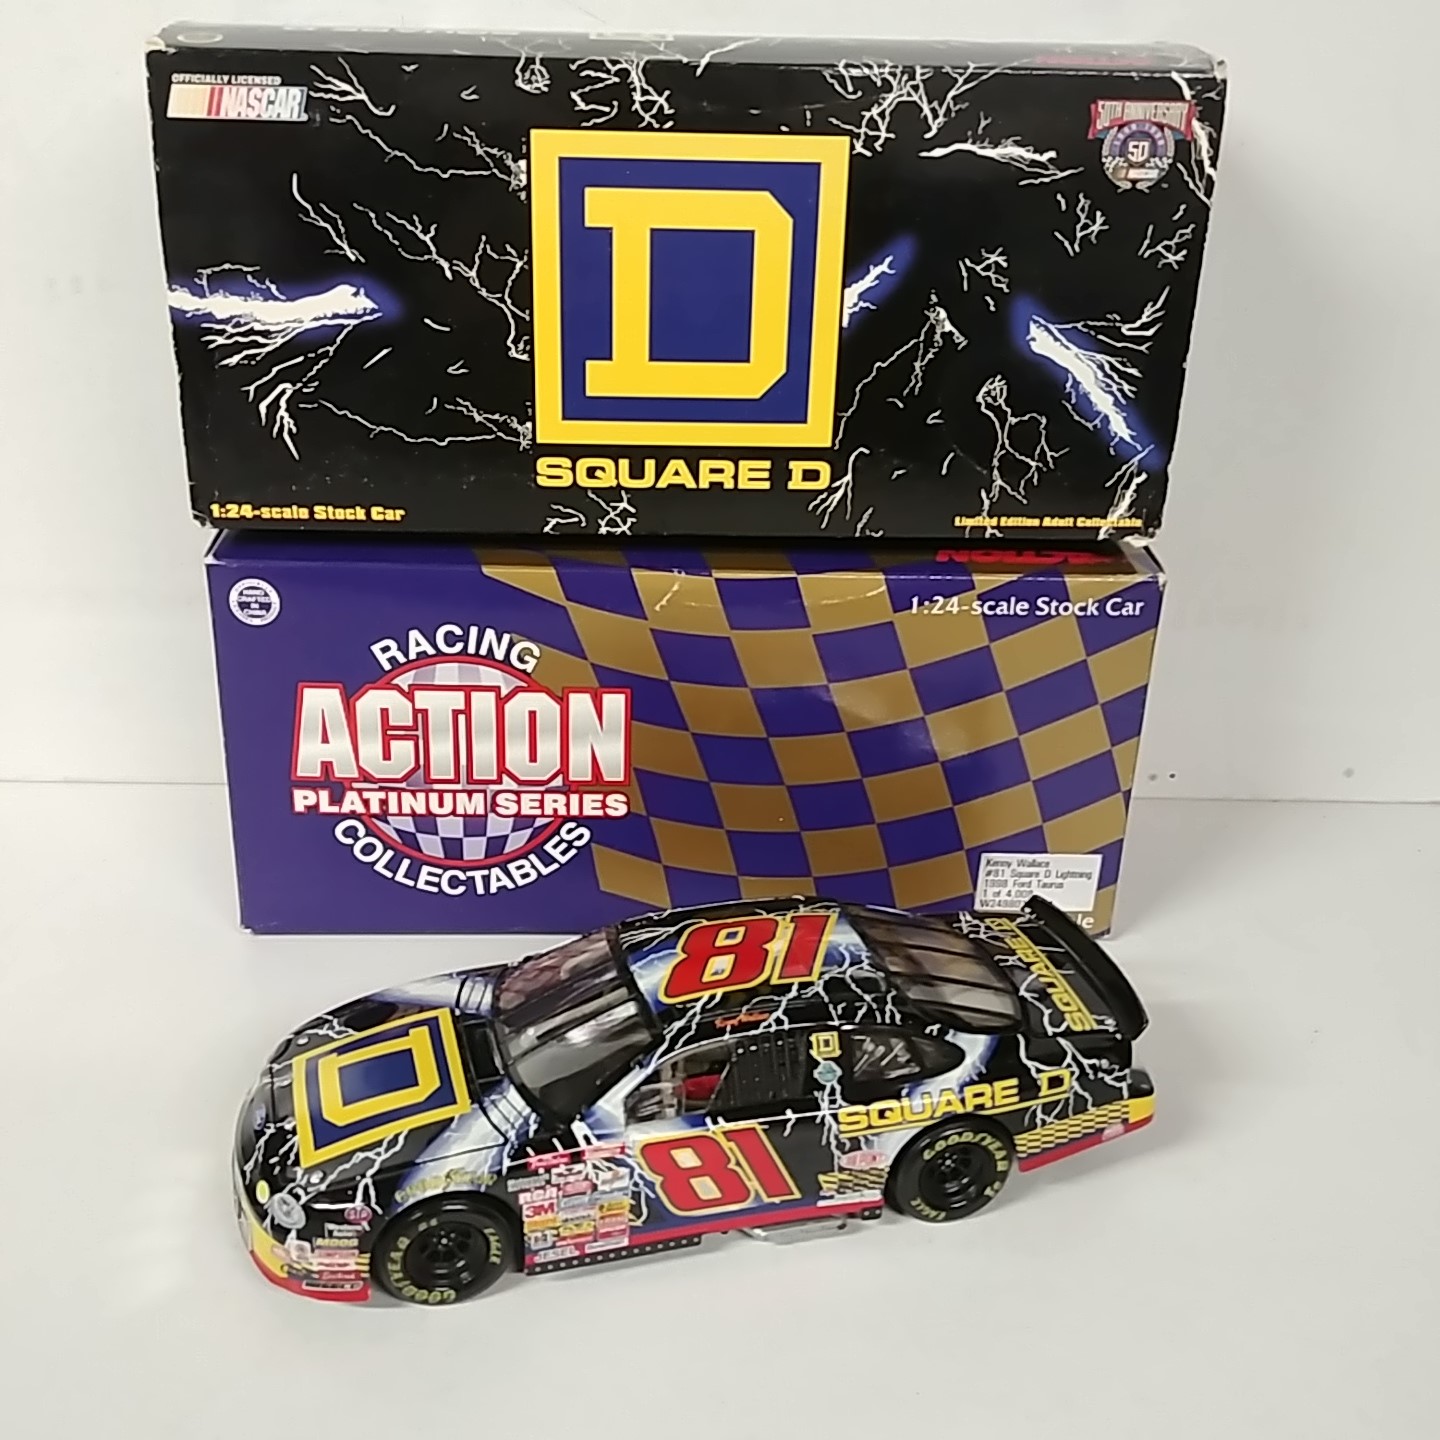 1998 Kenny Wallace 1/24th SquareD "Lightning" Taurus